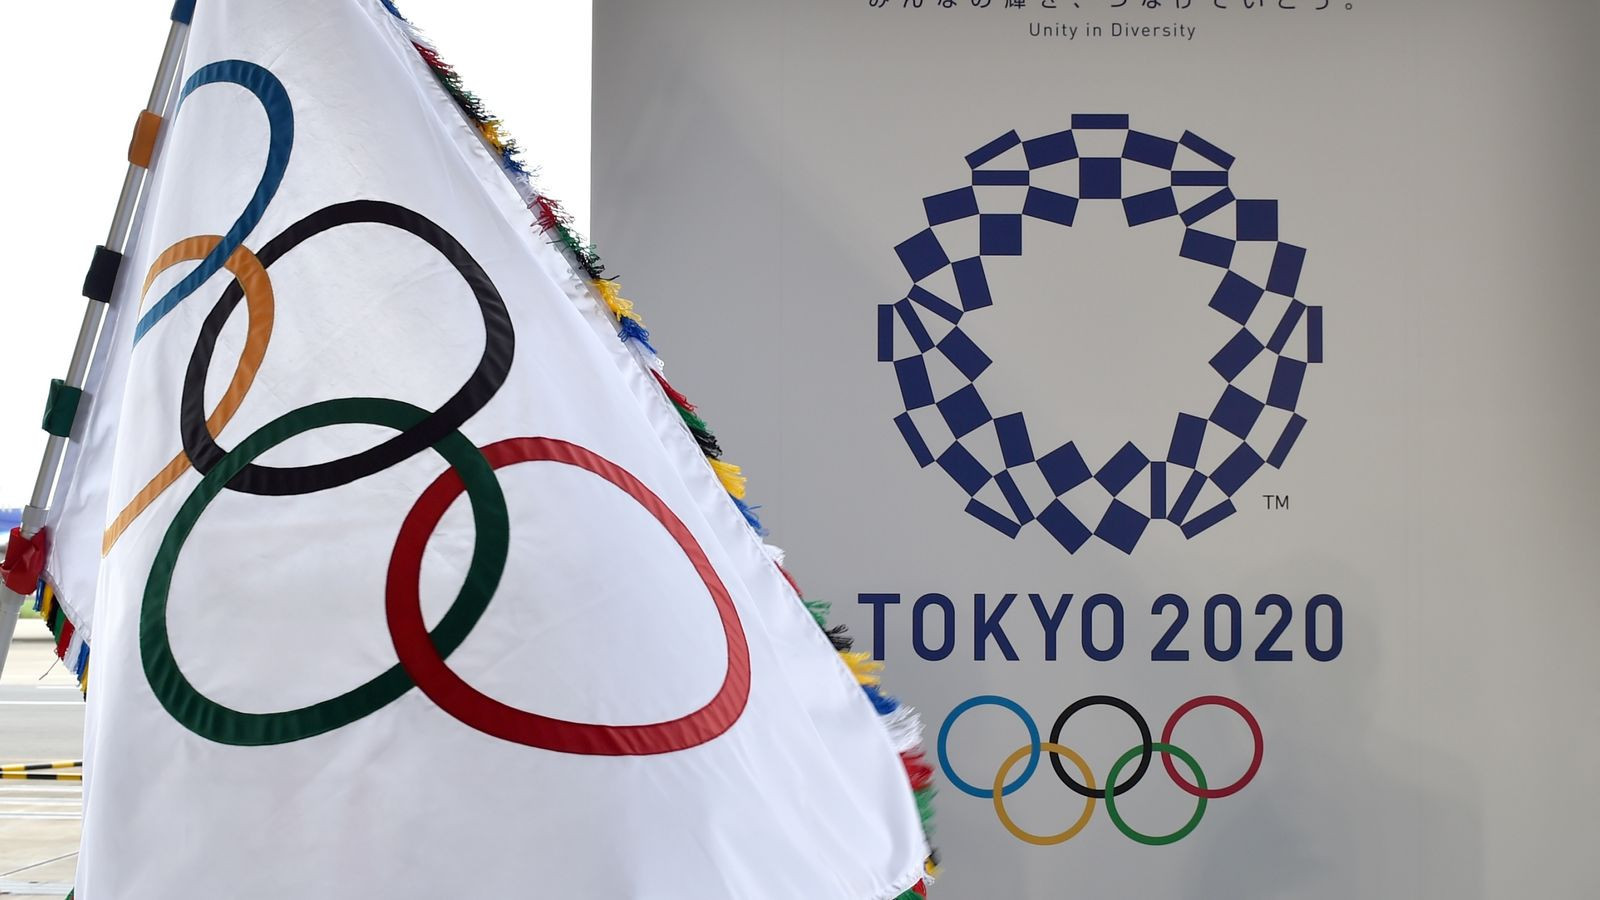 Tokyo 2020 Face Sponsor Crisis With Contracts Expiring At End Of The Year